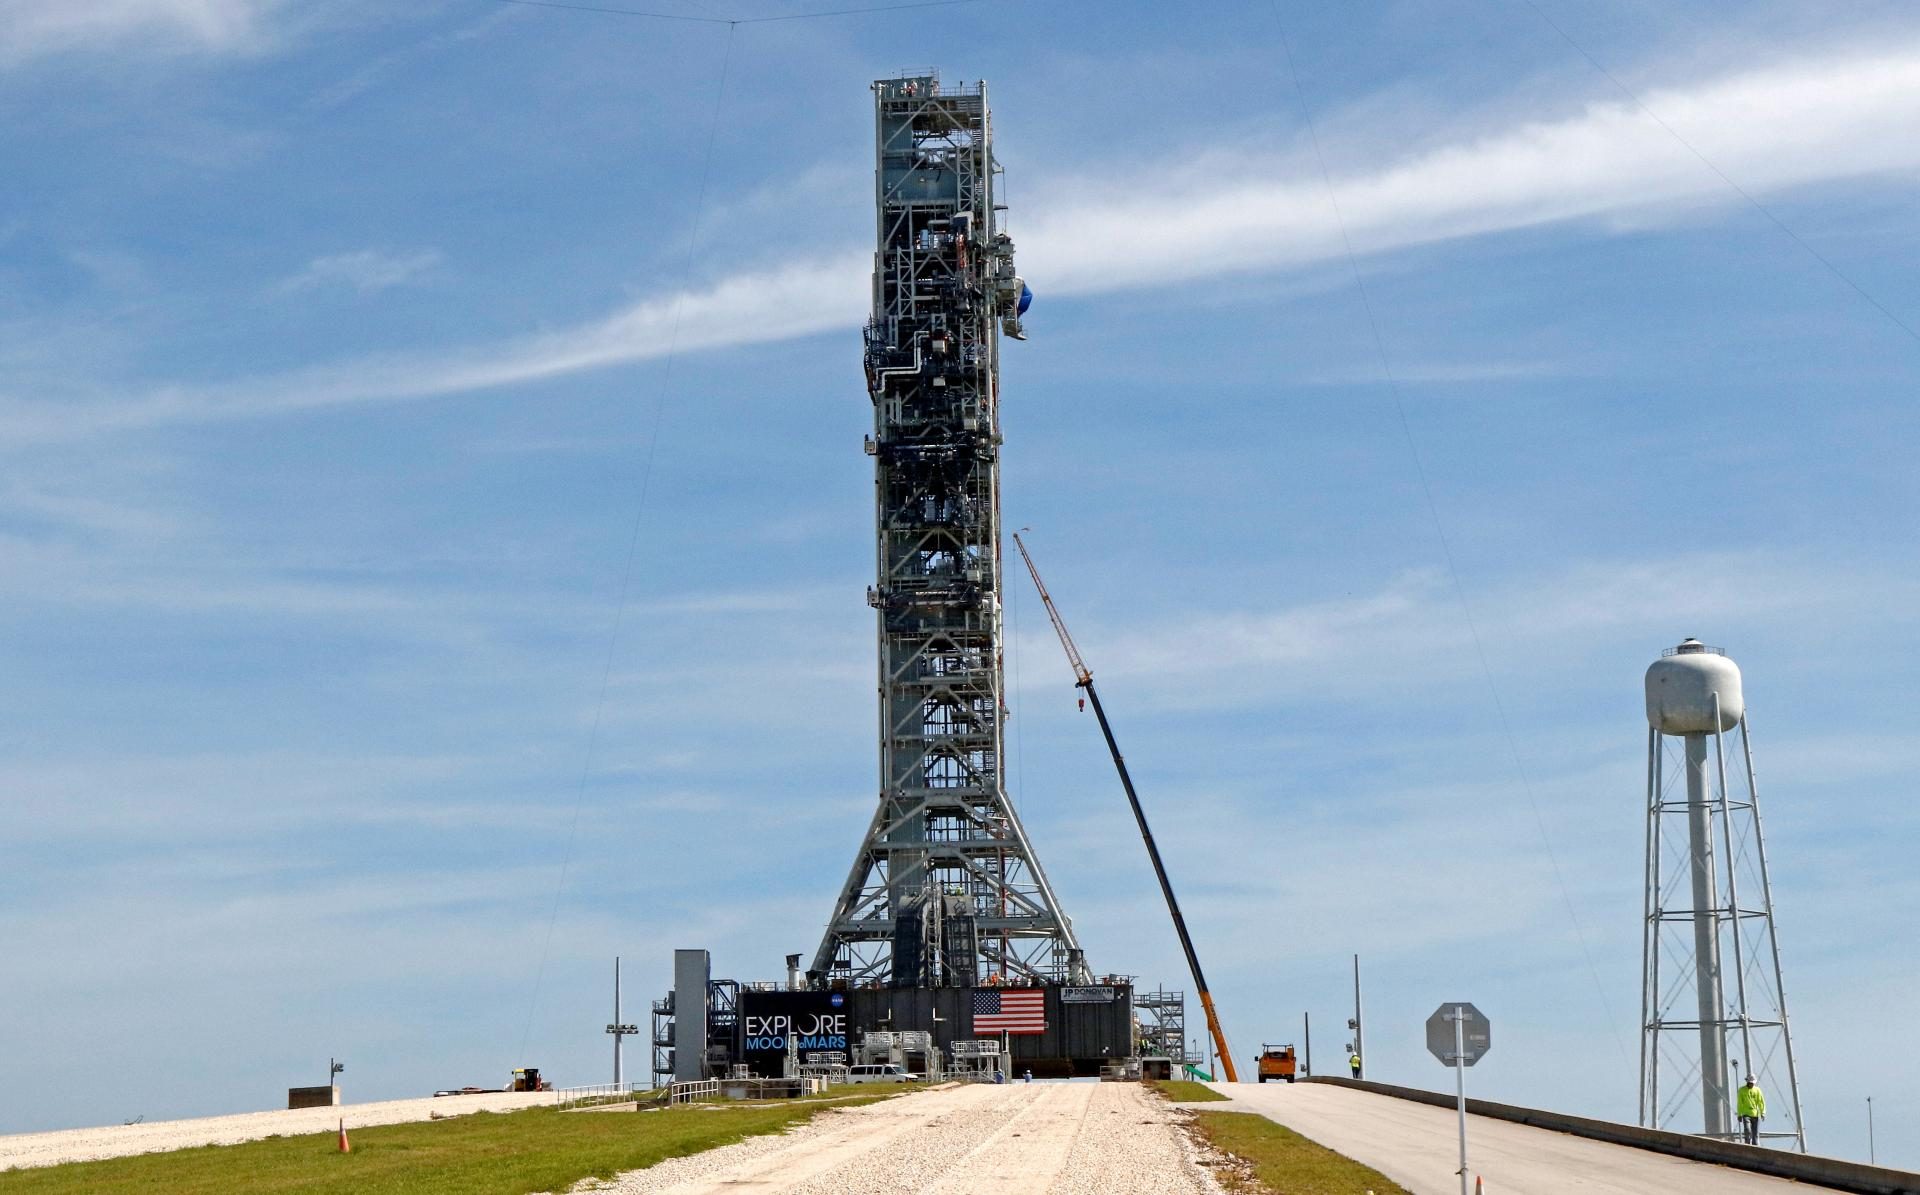 NASA’s Boeing moon rocket cuts short ‘once-in-a-generation’ ground test